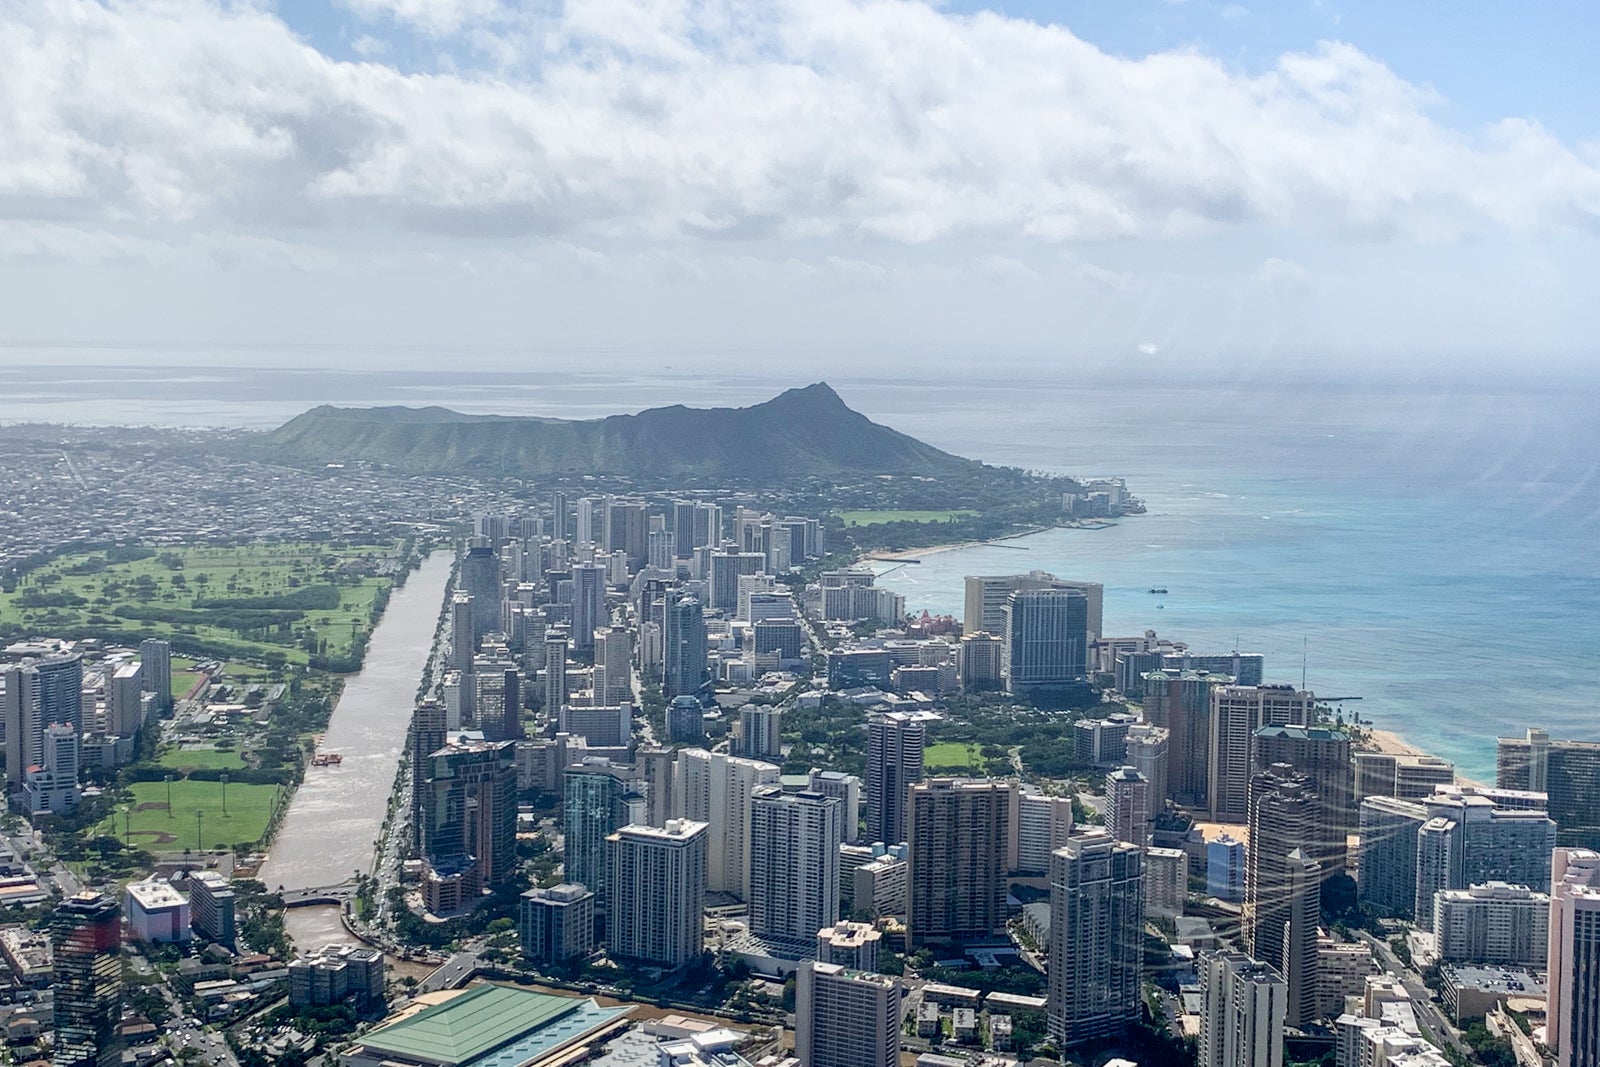 view of Diamond Head from a chopper over Honolulu